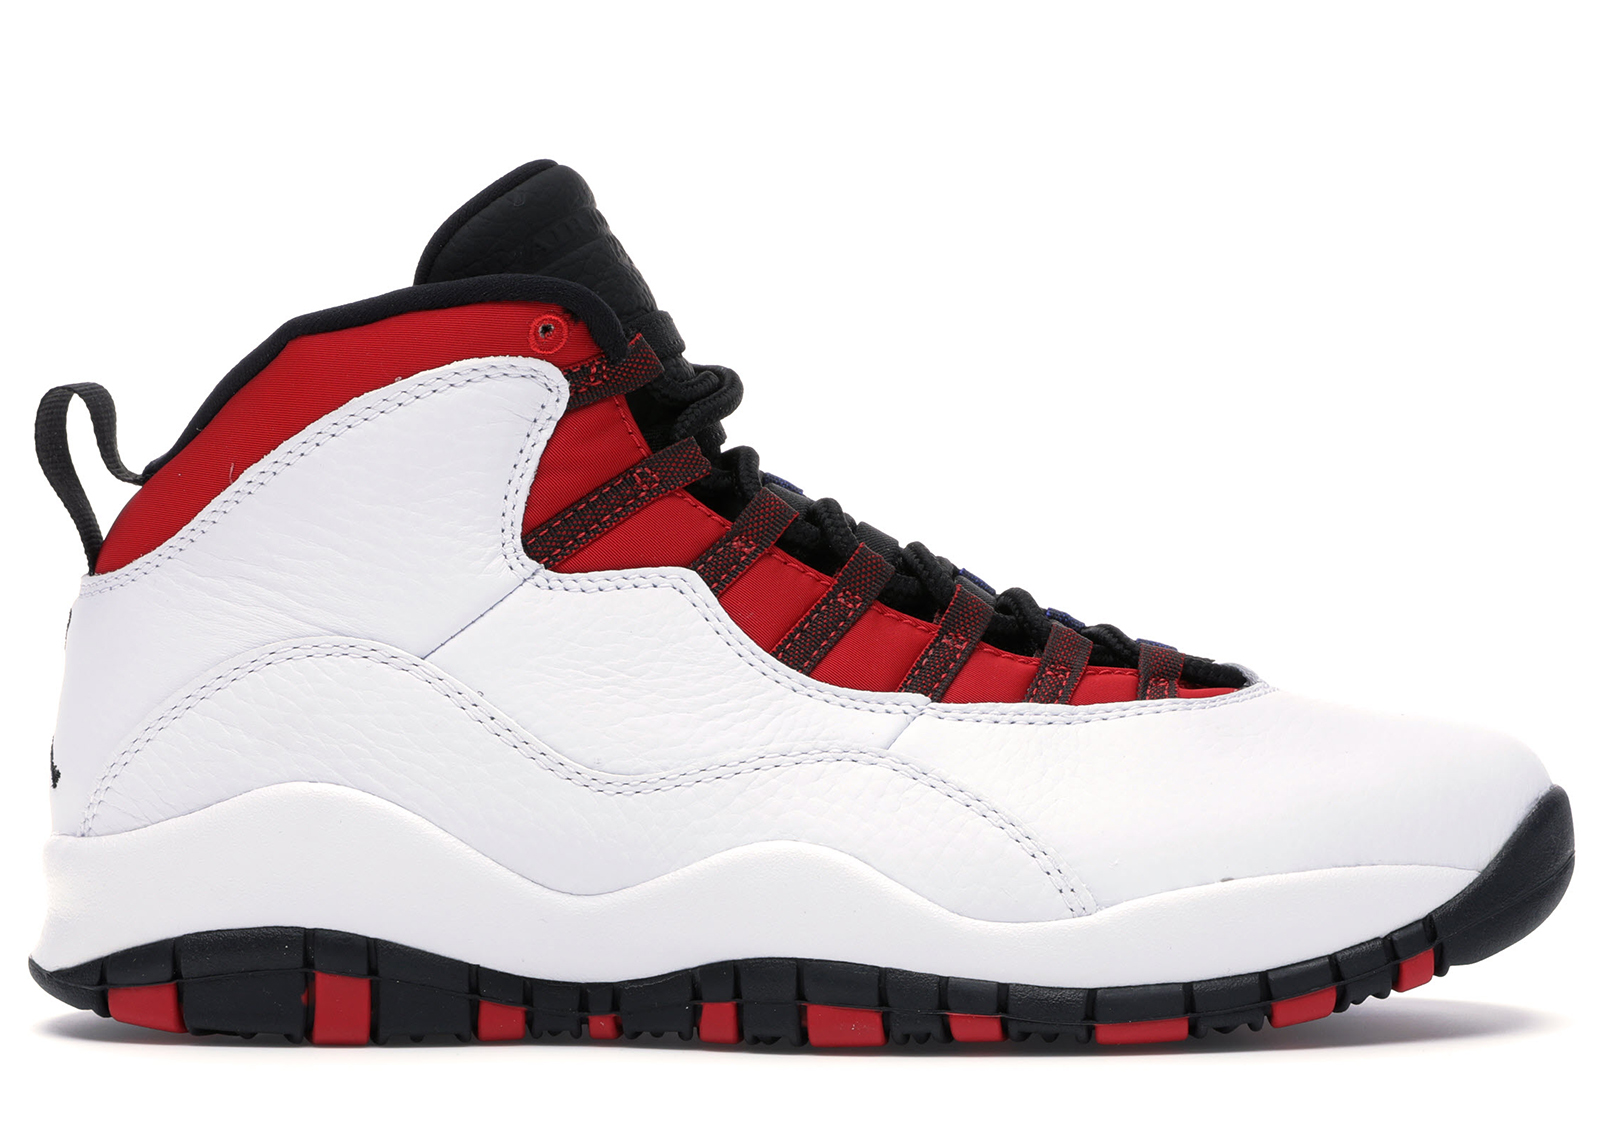 red and blue jordan 10s